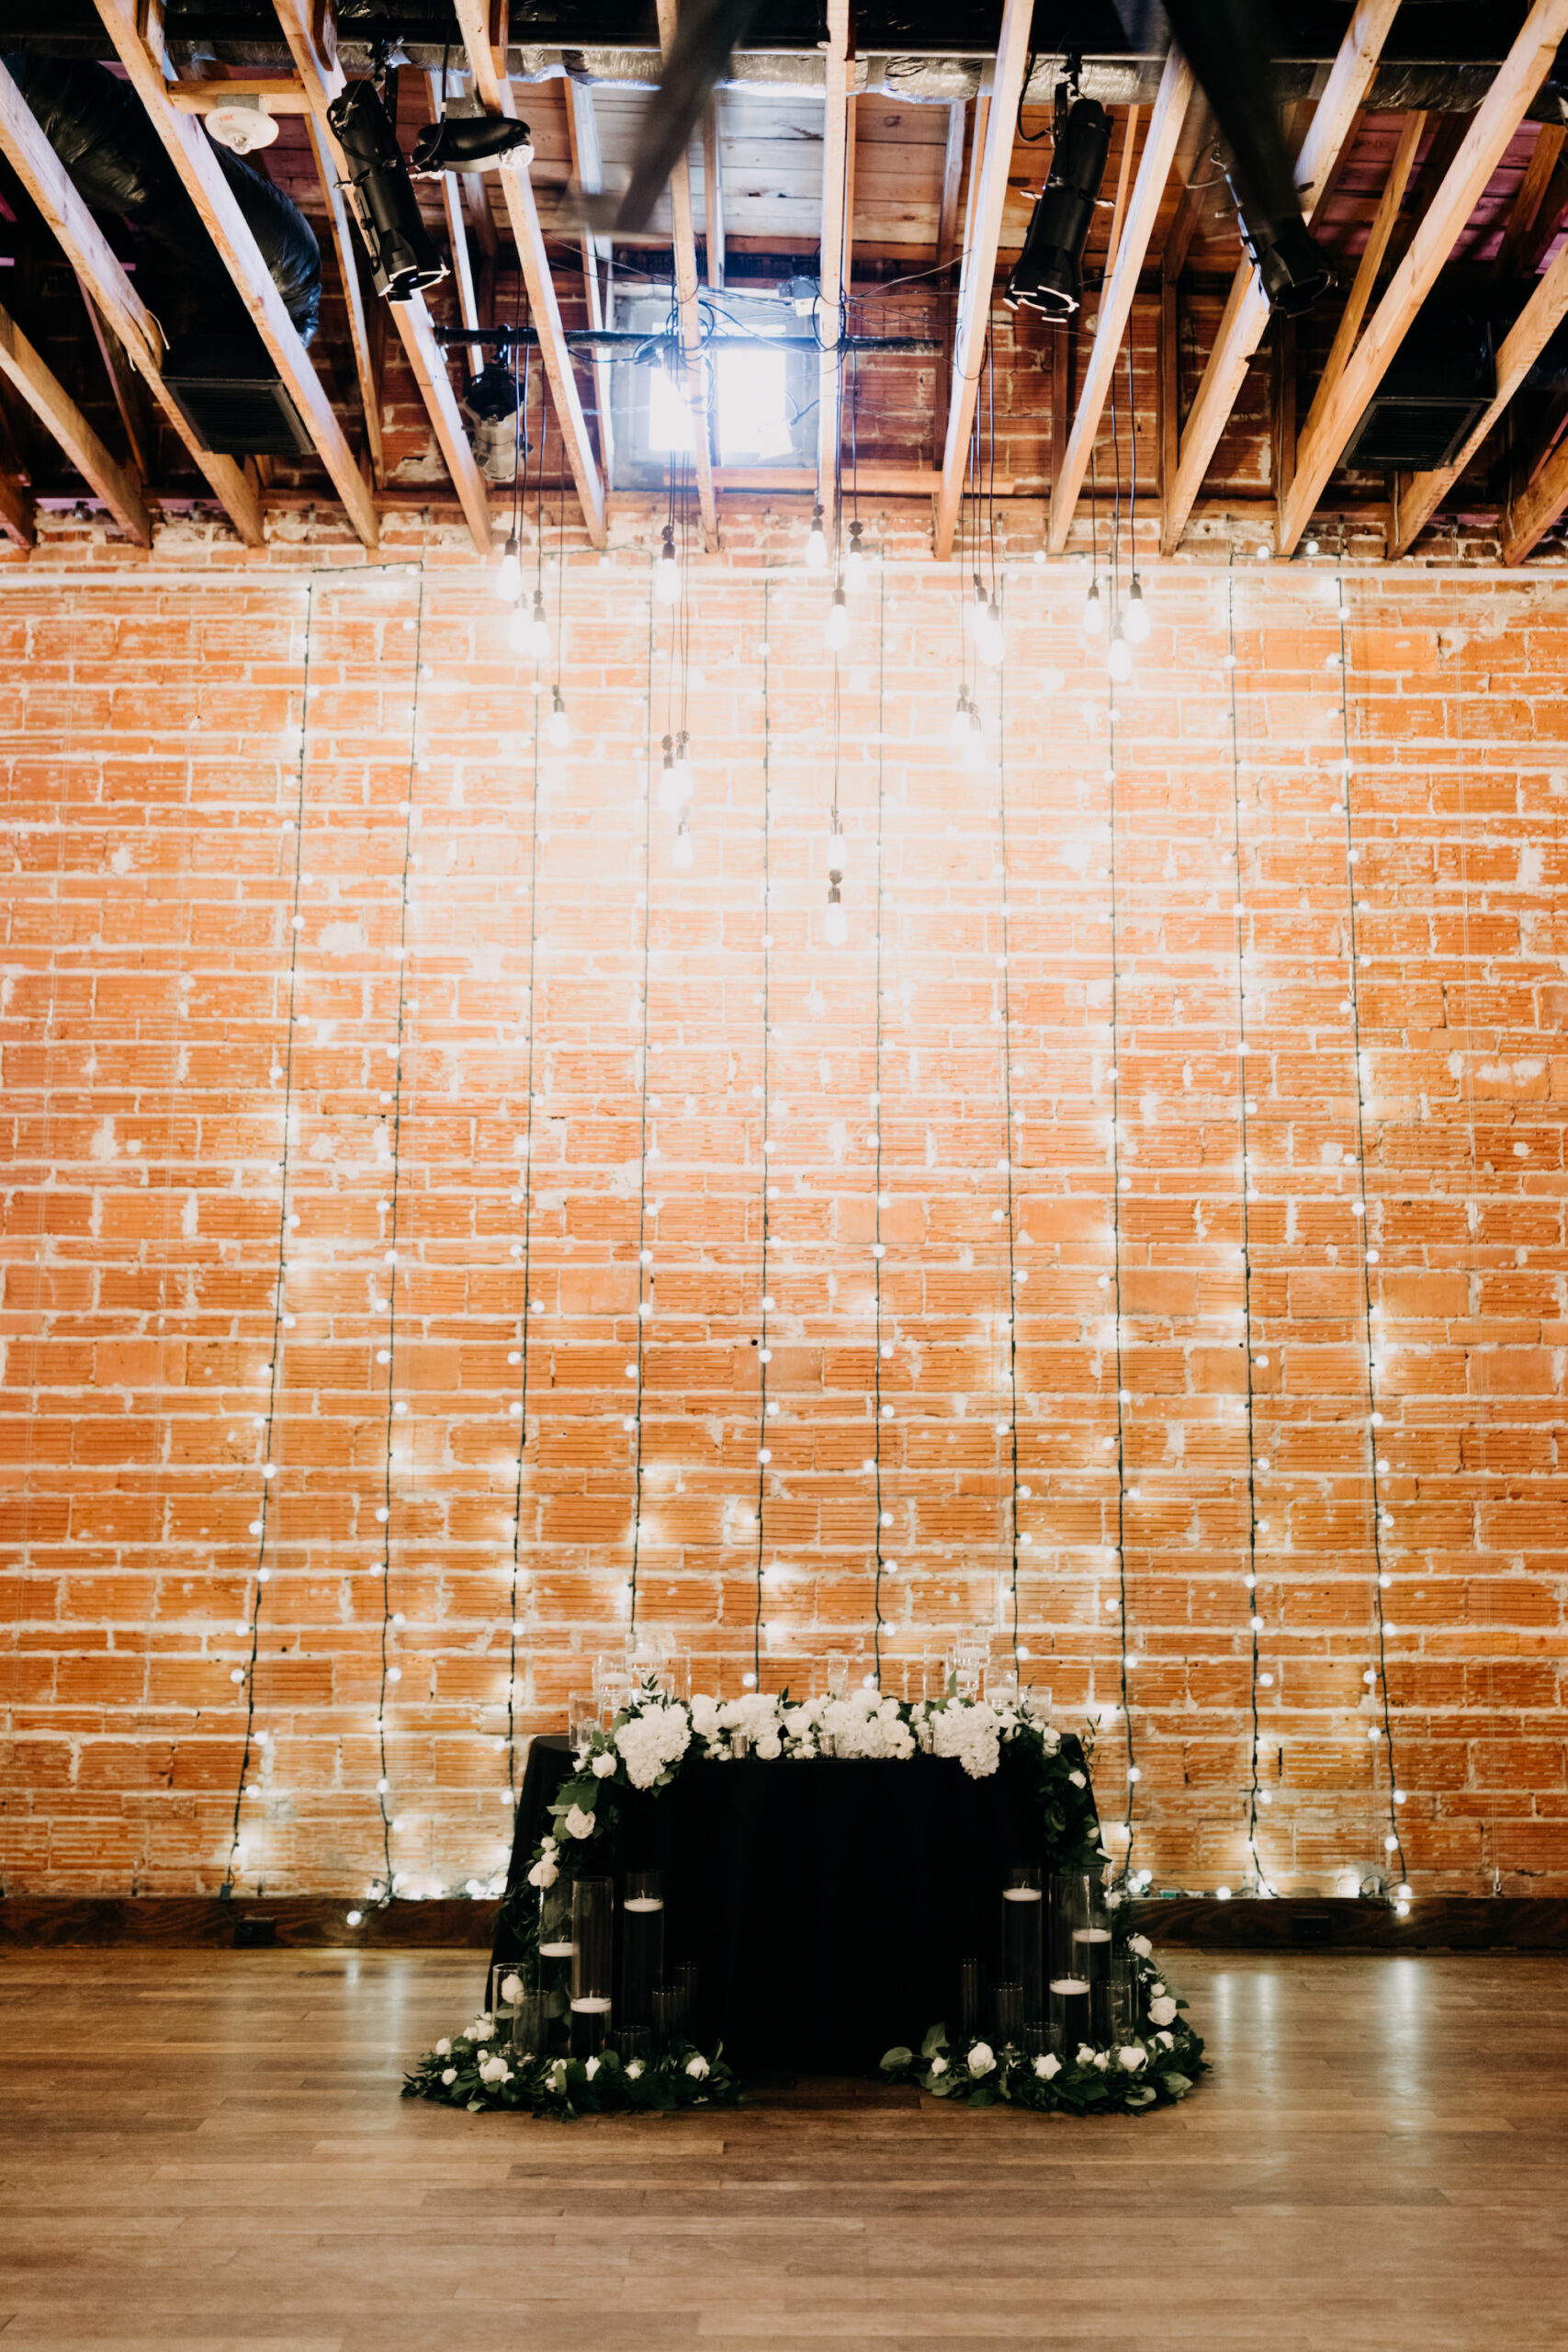 Simple Classic Black and White Wedding Reception Decor, Sweetheart Table with Red Brick Wall Backdrop and Hanging Lights | Tampa Bay Wedding Photographer Amber McWhorter Photography | Unique Industrial Wedding Venue NOVA 535